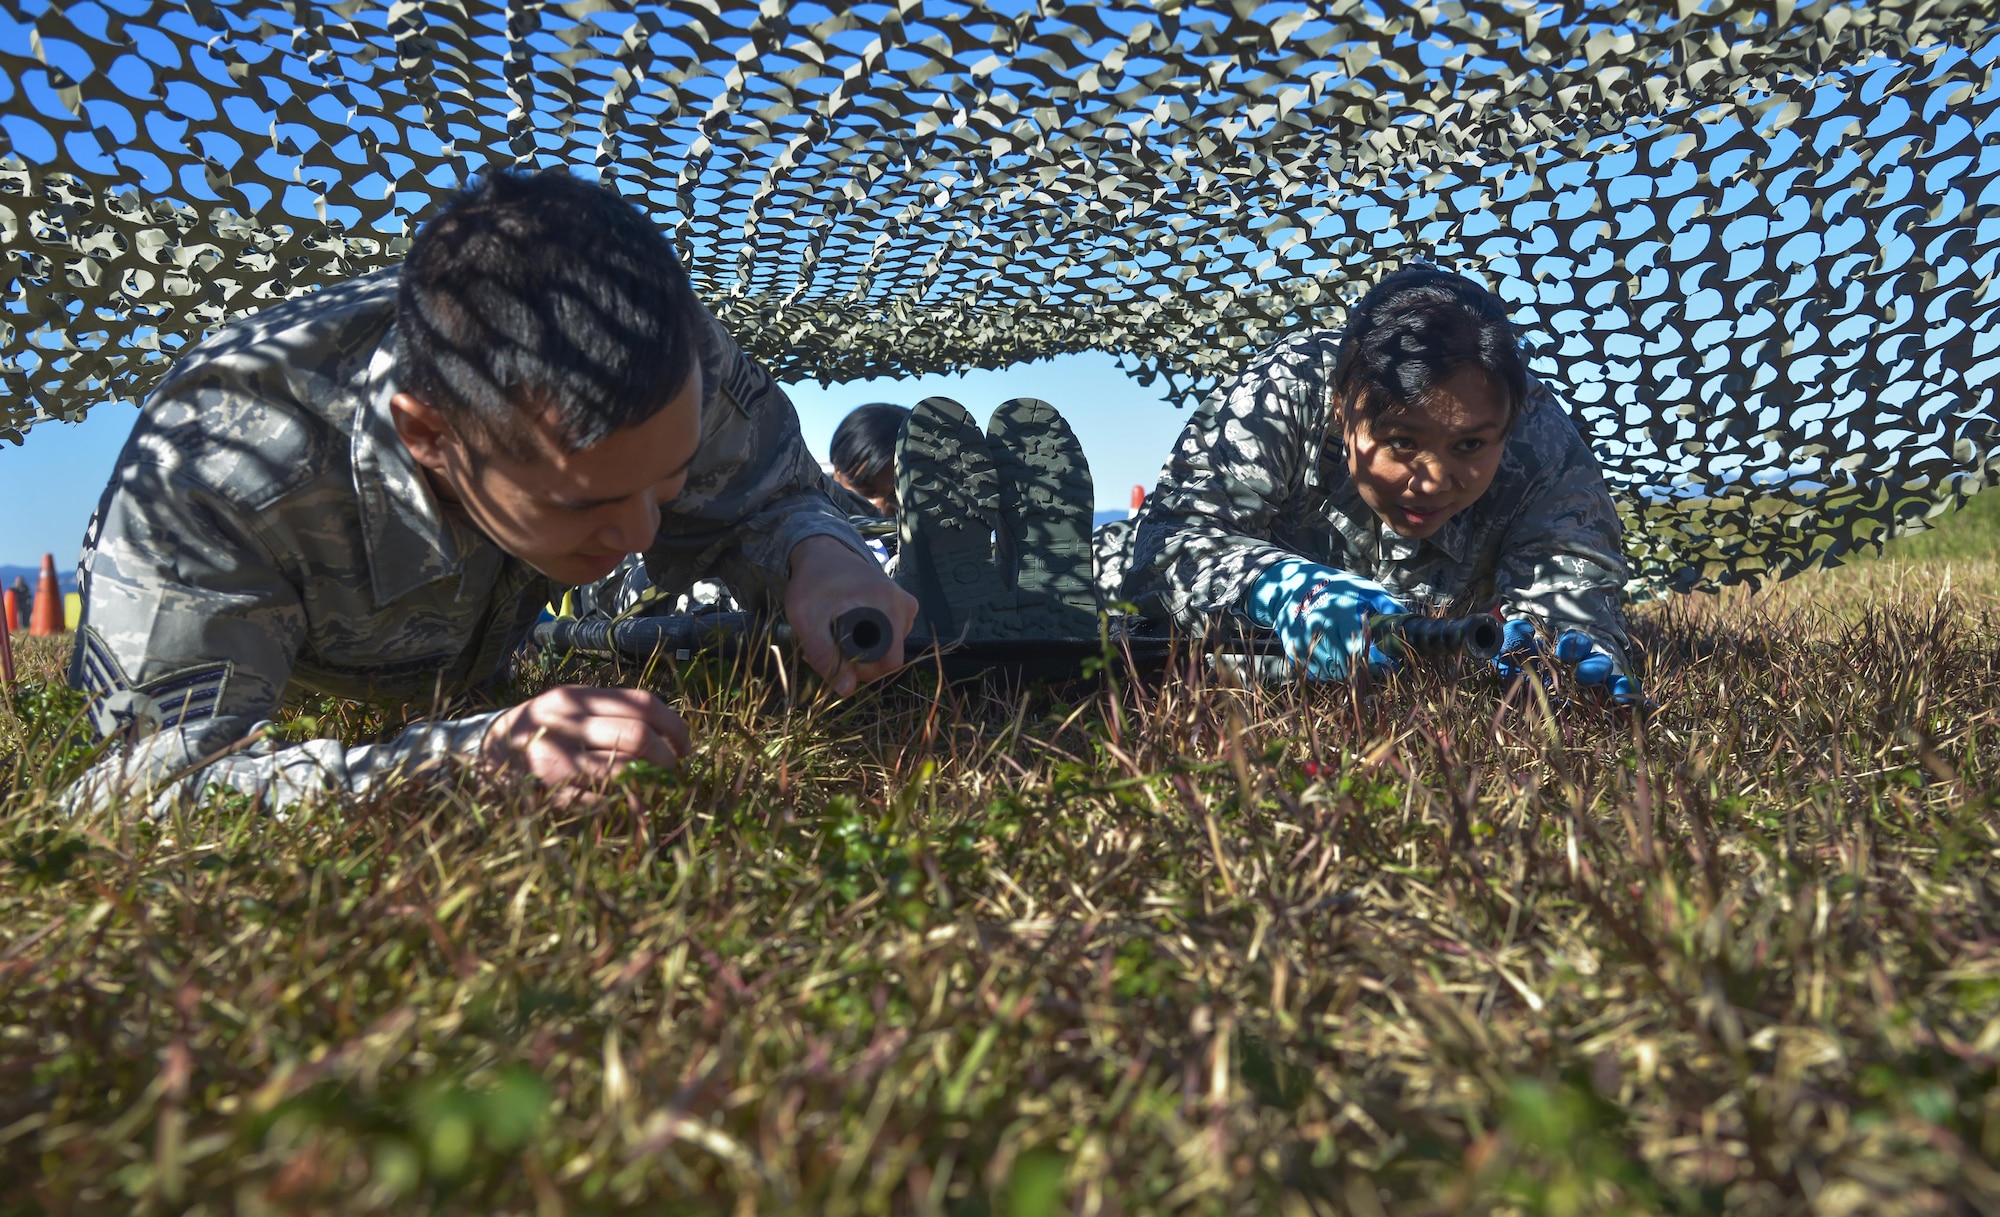 Airmen from the 374th Medical Group low crawl with a patient litter through an obstacle course during a medical evacuation training scenario at Yokota Air Base, Japan, Nov. 4, 2015. The medical evacuation training was completed as part of the Samurai Readiness Inspection being conducted in conjunction with the wing’s participation in exercise Vigilant Ace 16, a U.S. and South Korea combined exercise aimed at enhancing operational and tactical level coordination through combined and joint combat training. (U.S. Air Force photo/Senior Airman David Owsianka)